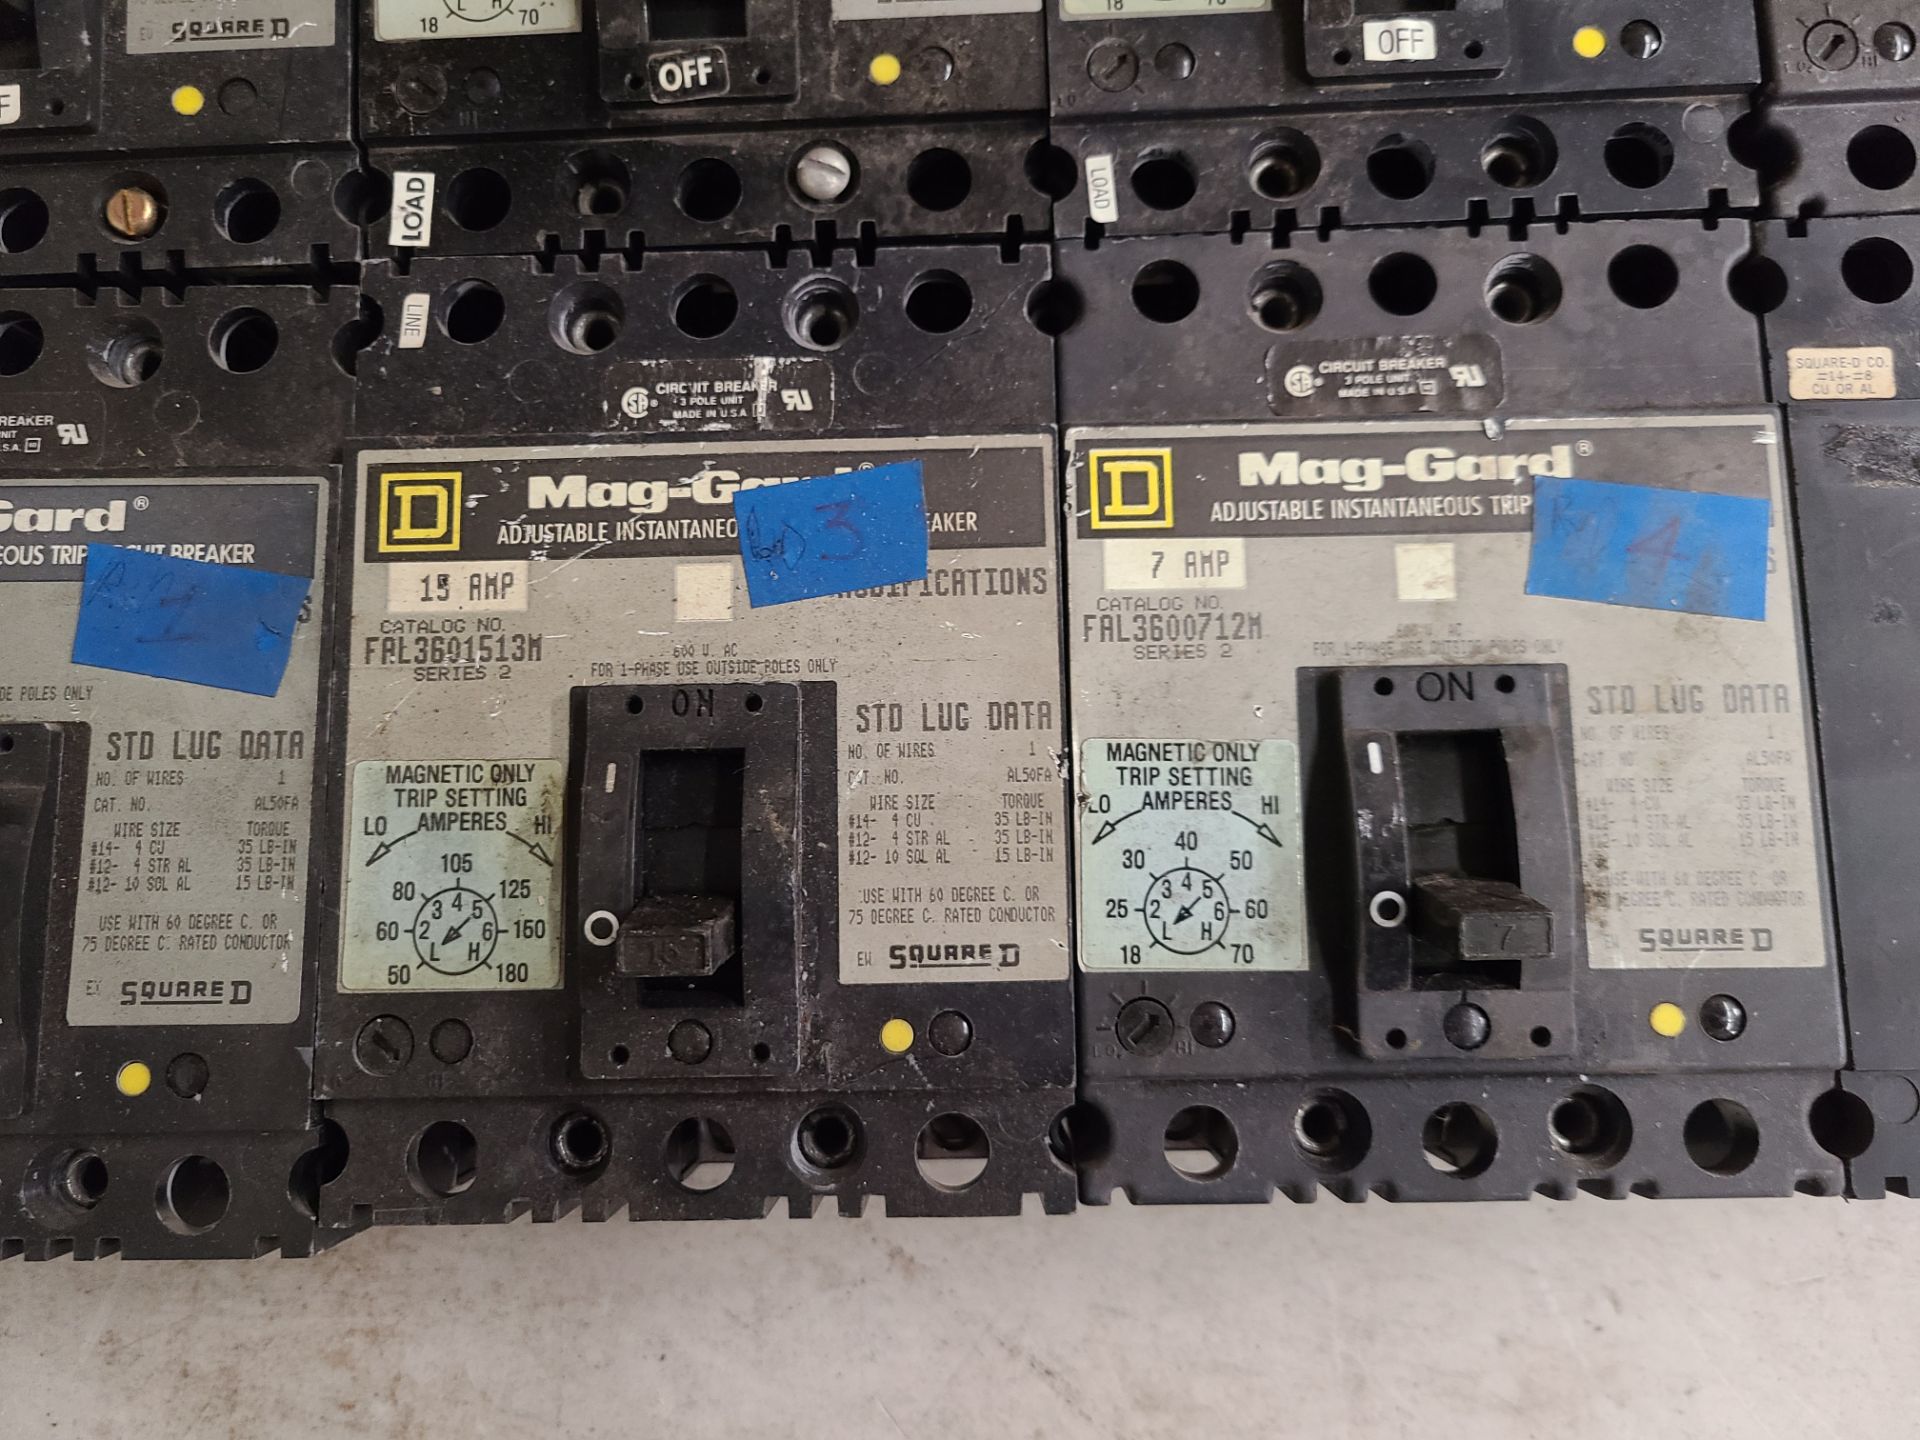 LOT OF SQUARE D MAG-GARD INDUSTRIAL MOLDED CASE CIRCUIT BREAKERS - Image 6 of 11